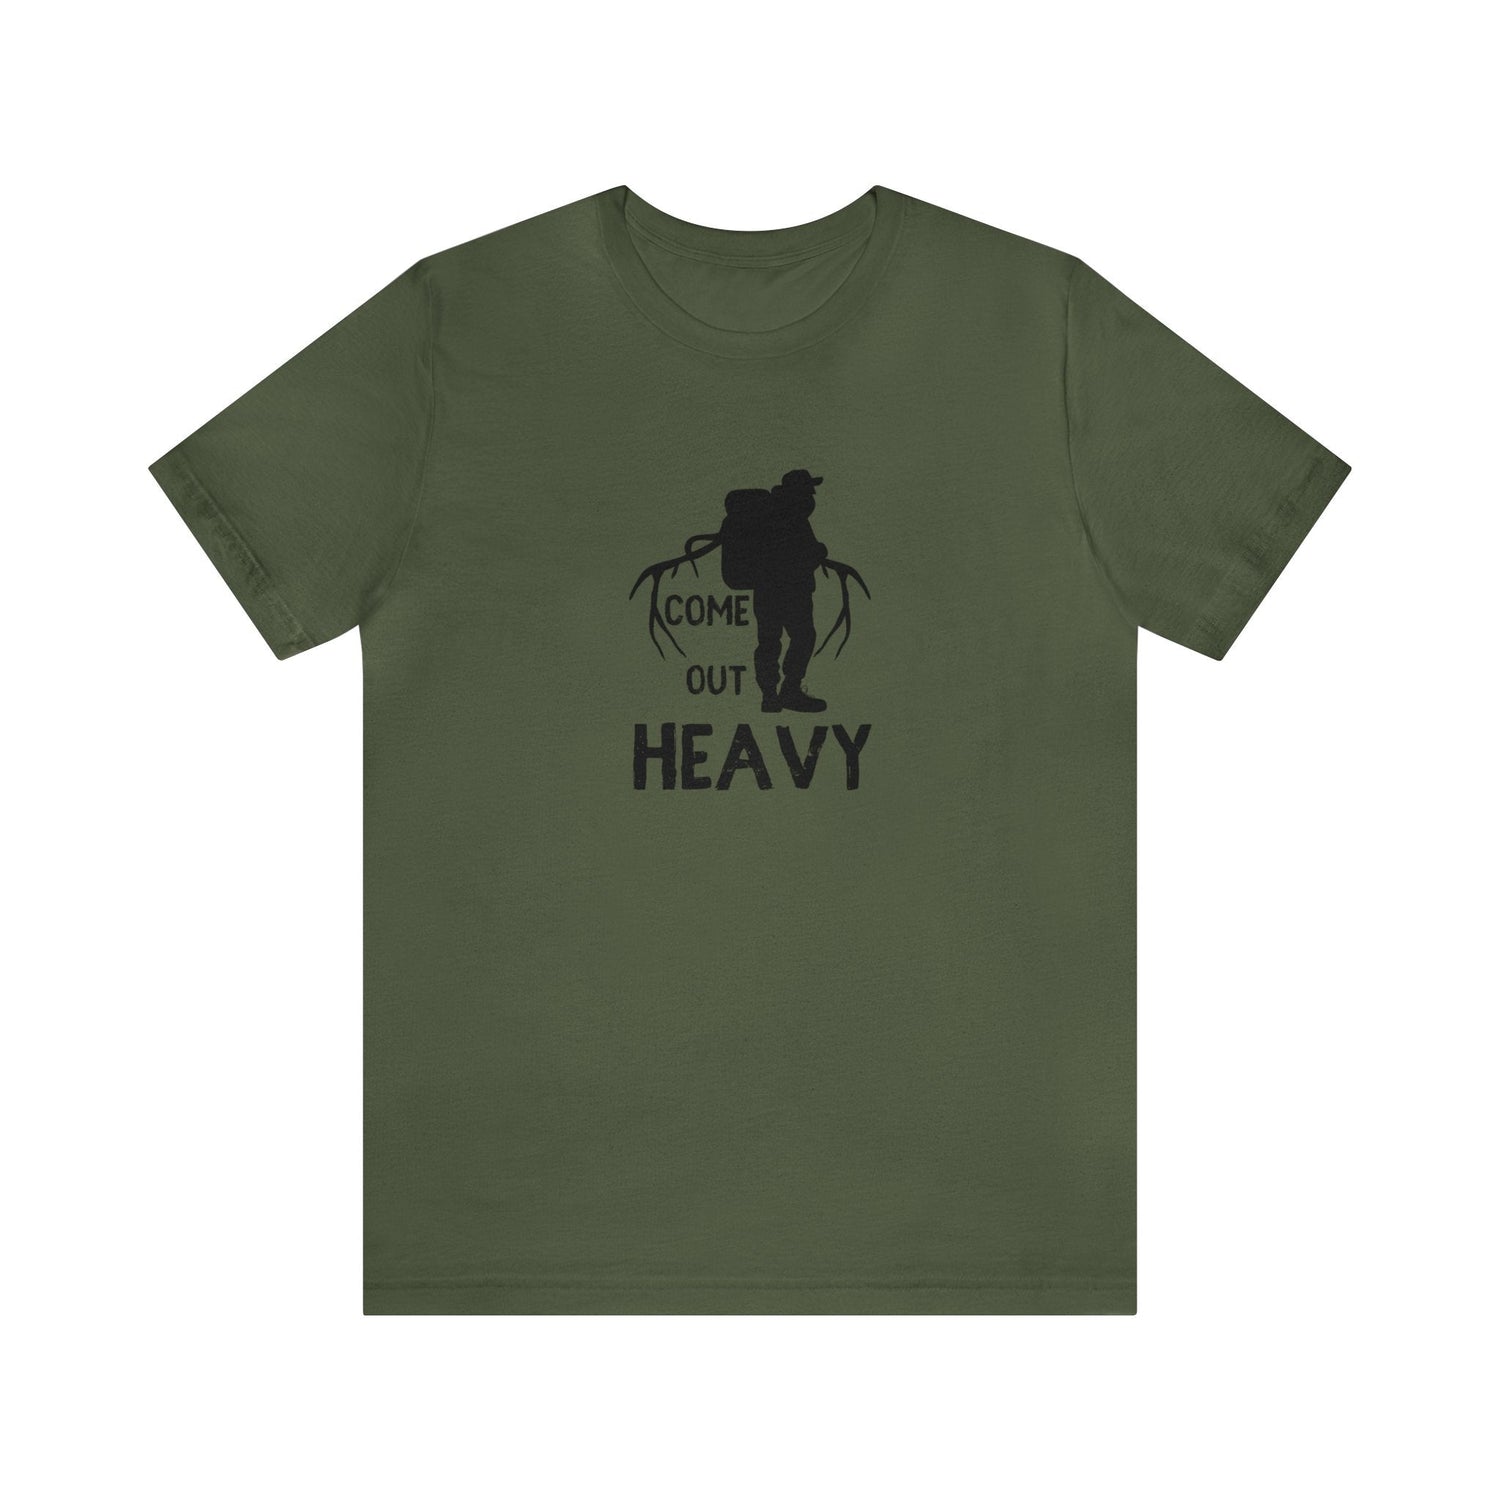 Western elk hunting t-shirt, color military green, front design placement